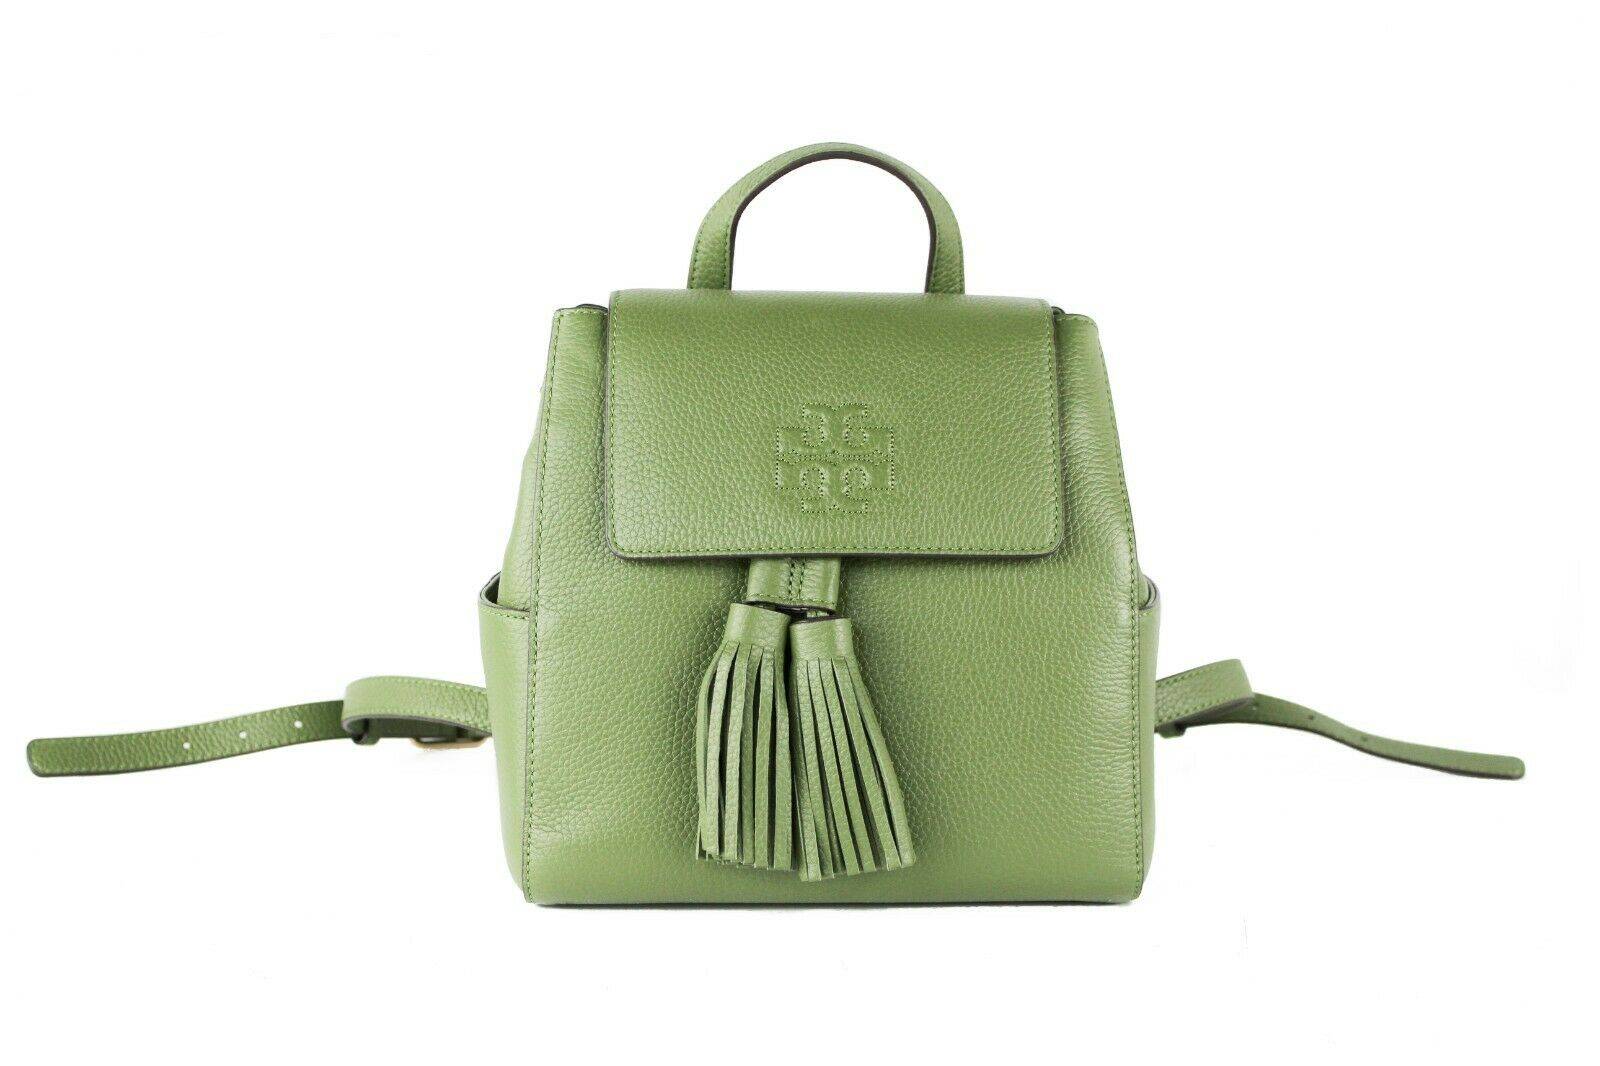 Thea Mini Pebbled Leather Backpack Bag - Youarrived